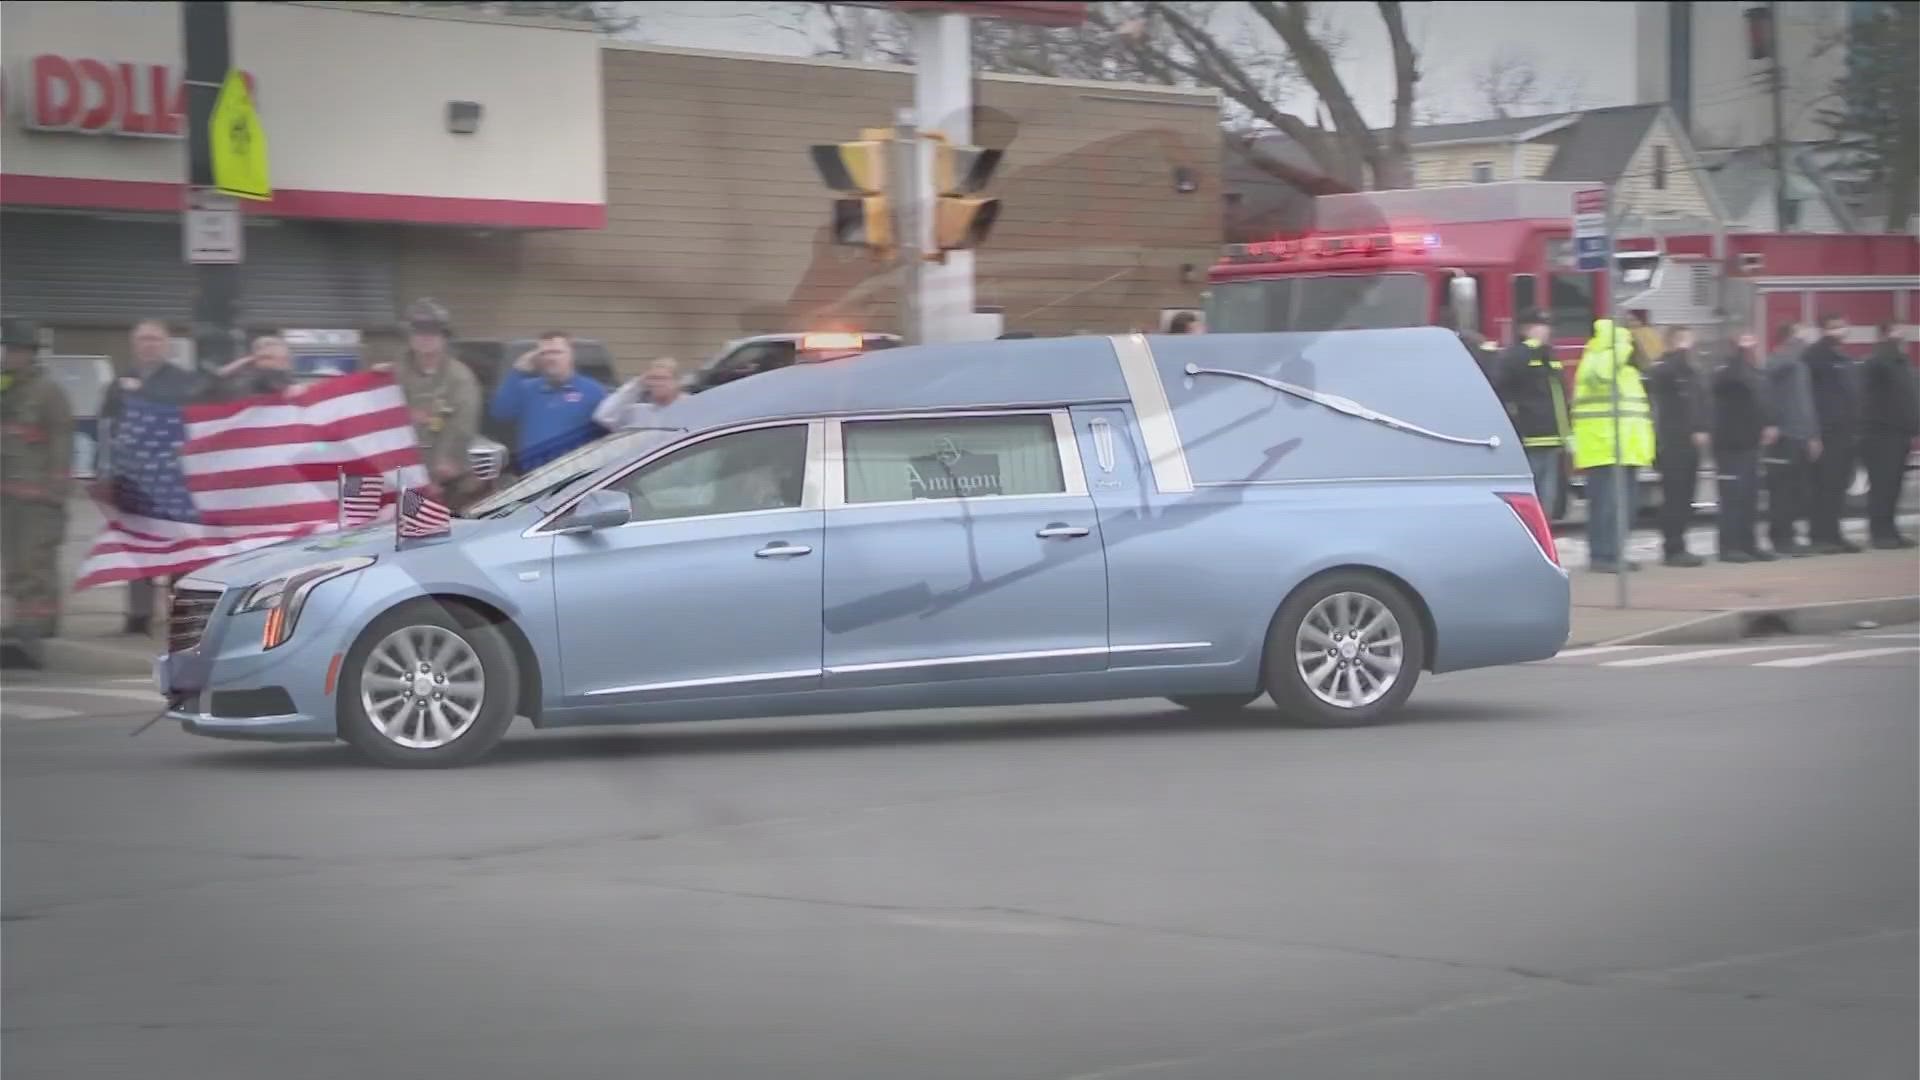 First responders gathered Friday for a special procession of a hearse carrying the remains of Jason Arno from ECMC to the Amigone Funeral Home.